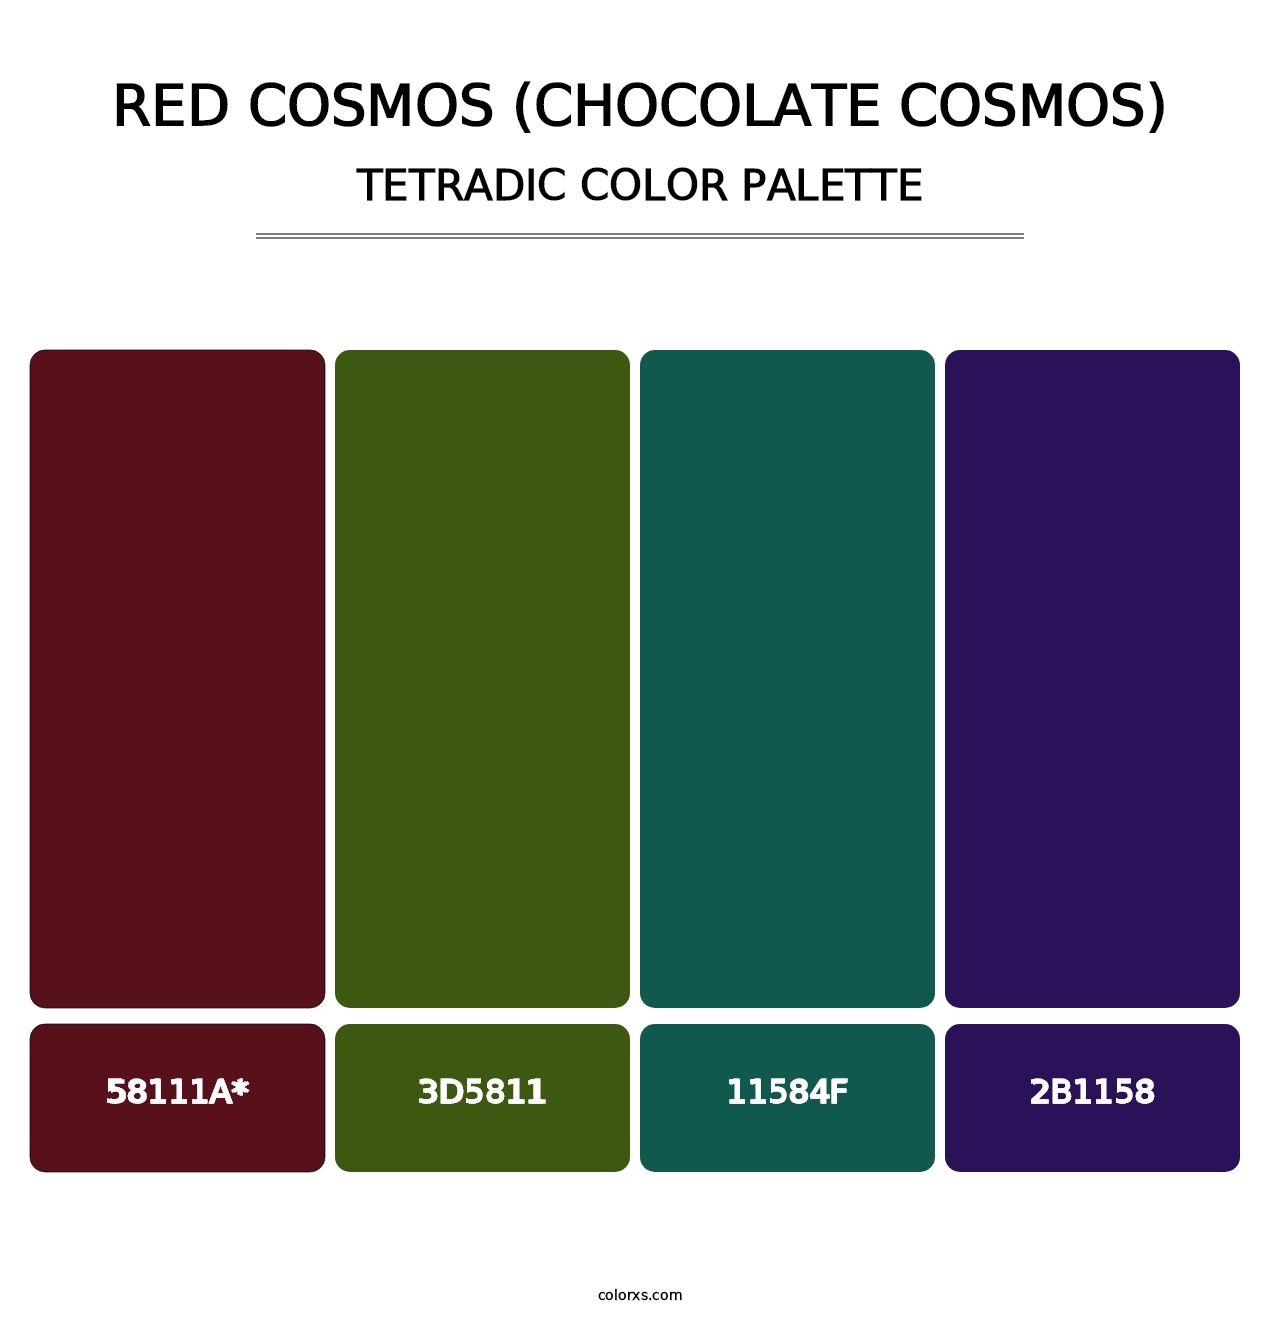 Red Cosmos (Chocolate Cosmos) - Tetradic Color Palette